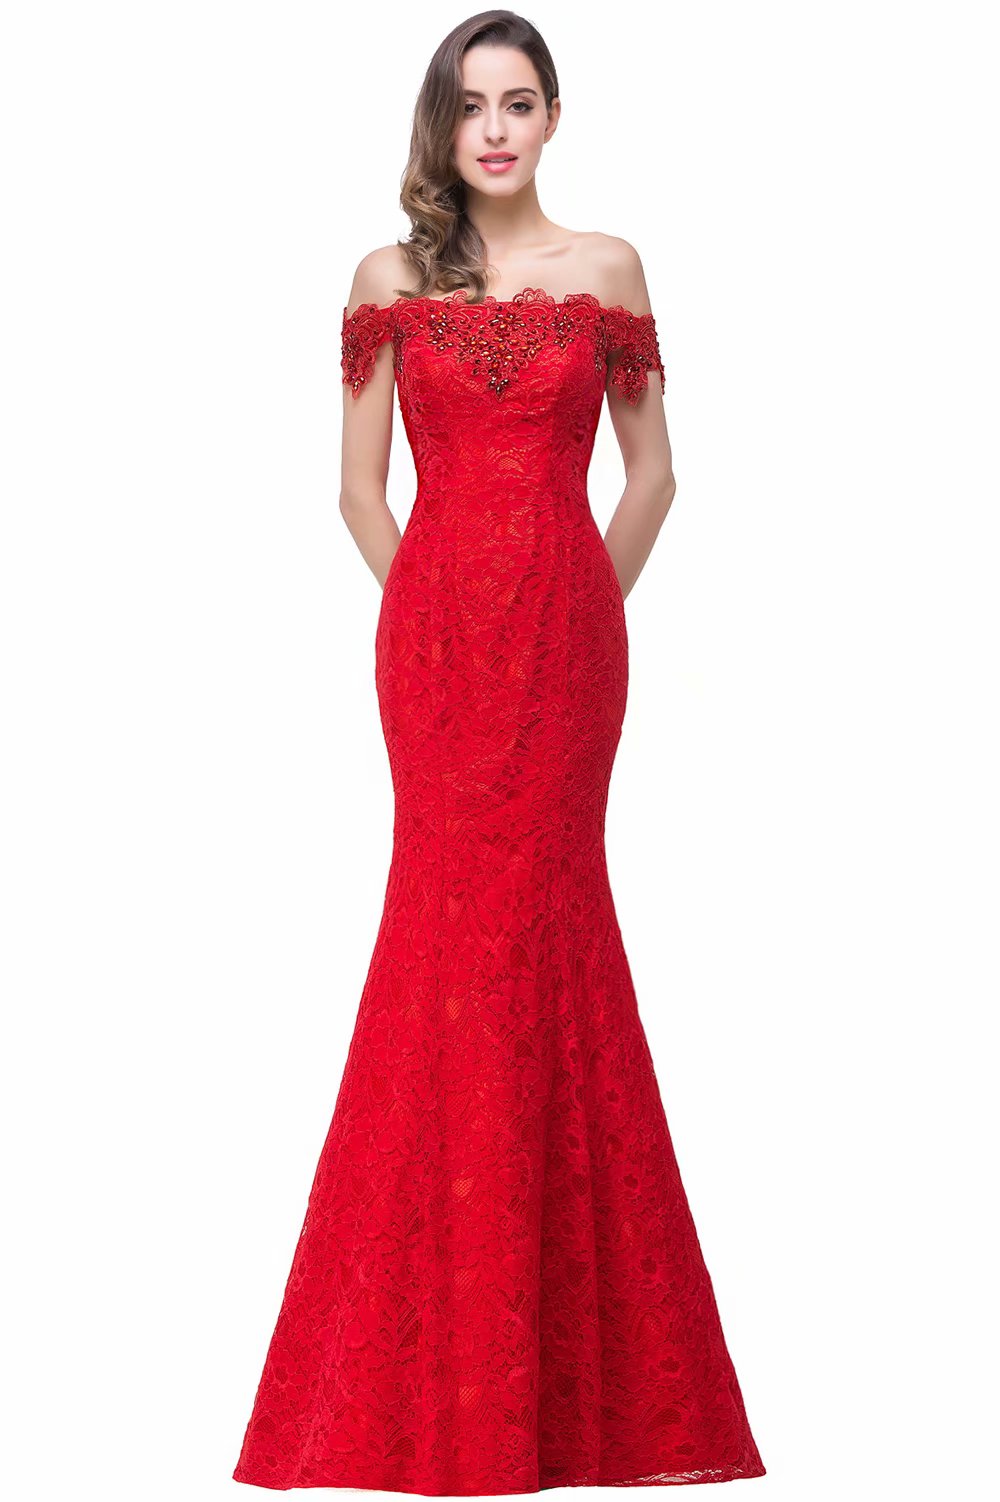 Luxury Fashion Prom Dress Red Lace Formal Gown Women Elegant Long Mermaid Party Dress